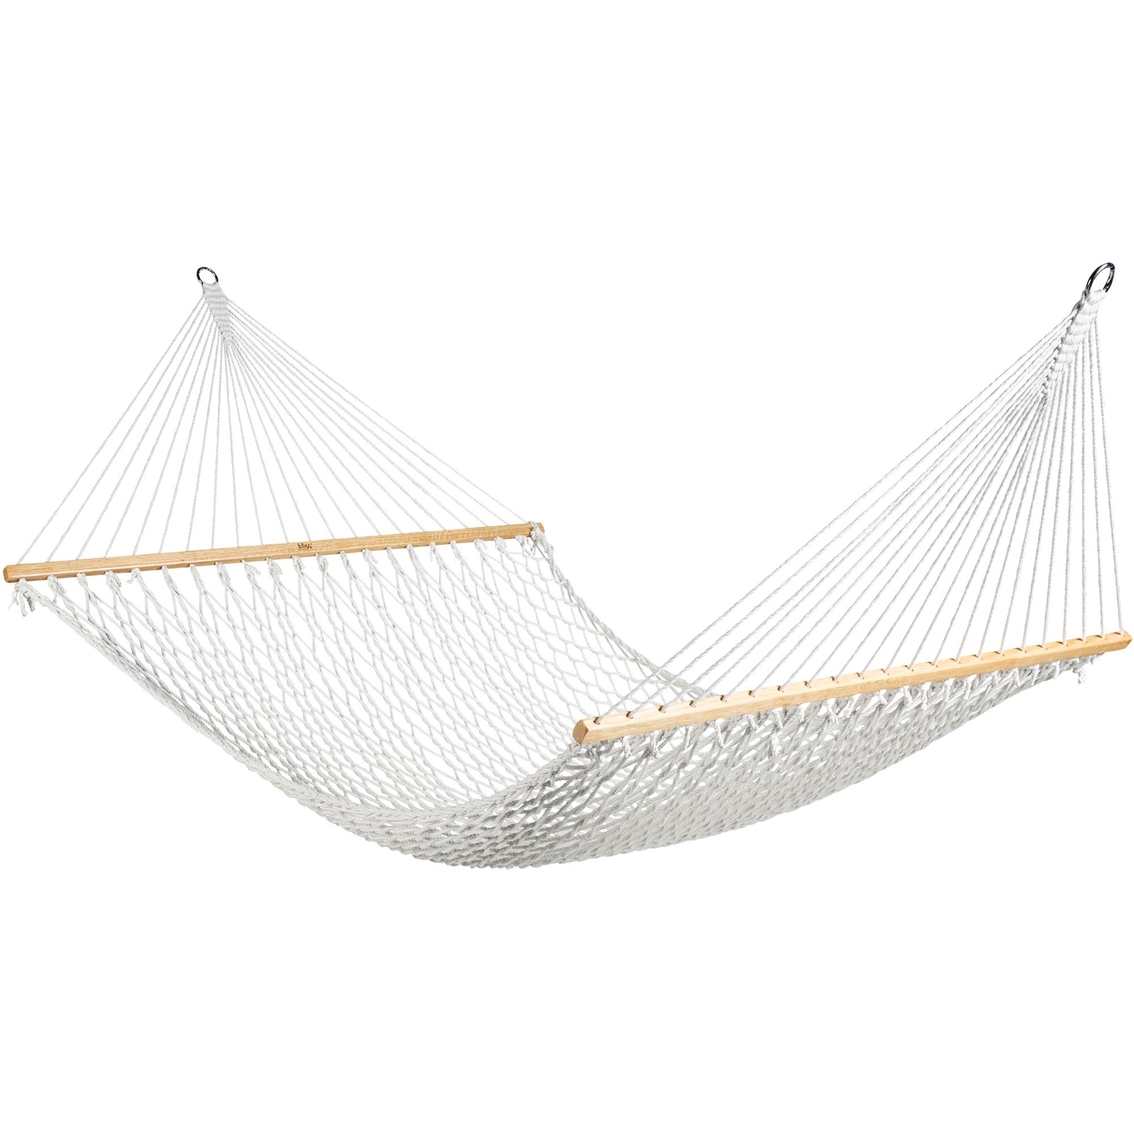 Bliss Hammocks 2 Person Classic Poly Rope Hammock; with Natural Rope - Image 2 of 5